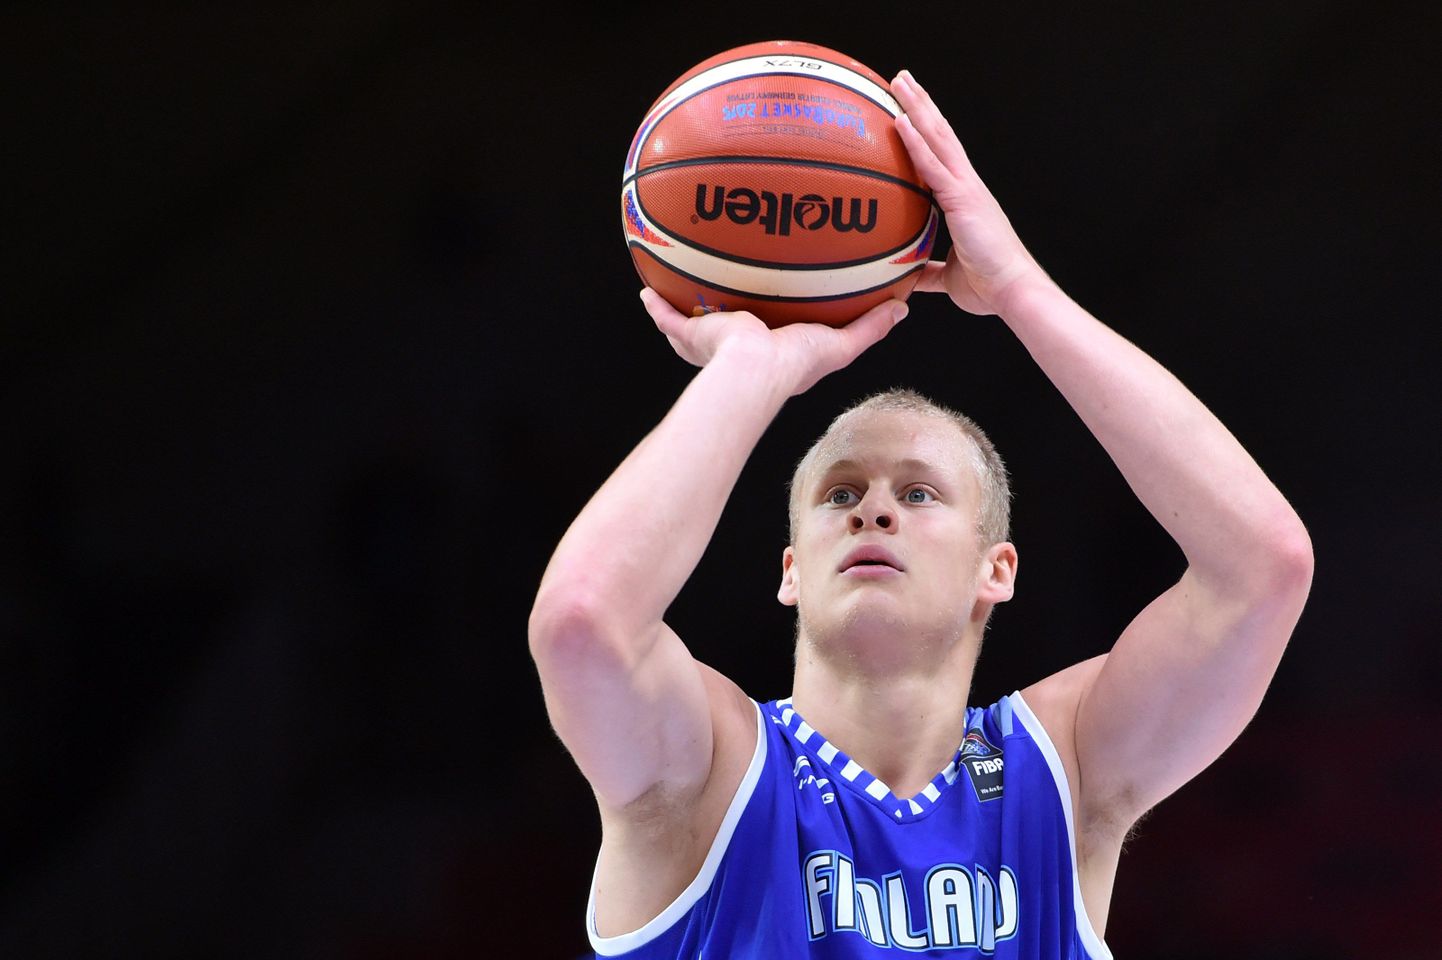 Finland's shooting guard Sasu Salin shoots a penalty during the round of 16 basketball match between Serbia and Finland at the EuroBasket 2015 in Lille, northern France, on September 13, 2015.  AFP PHOTO / PHILIPPE HUGUEN